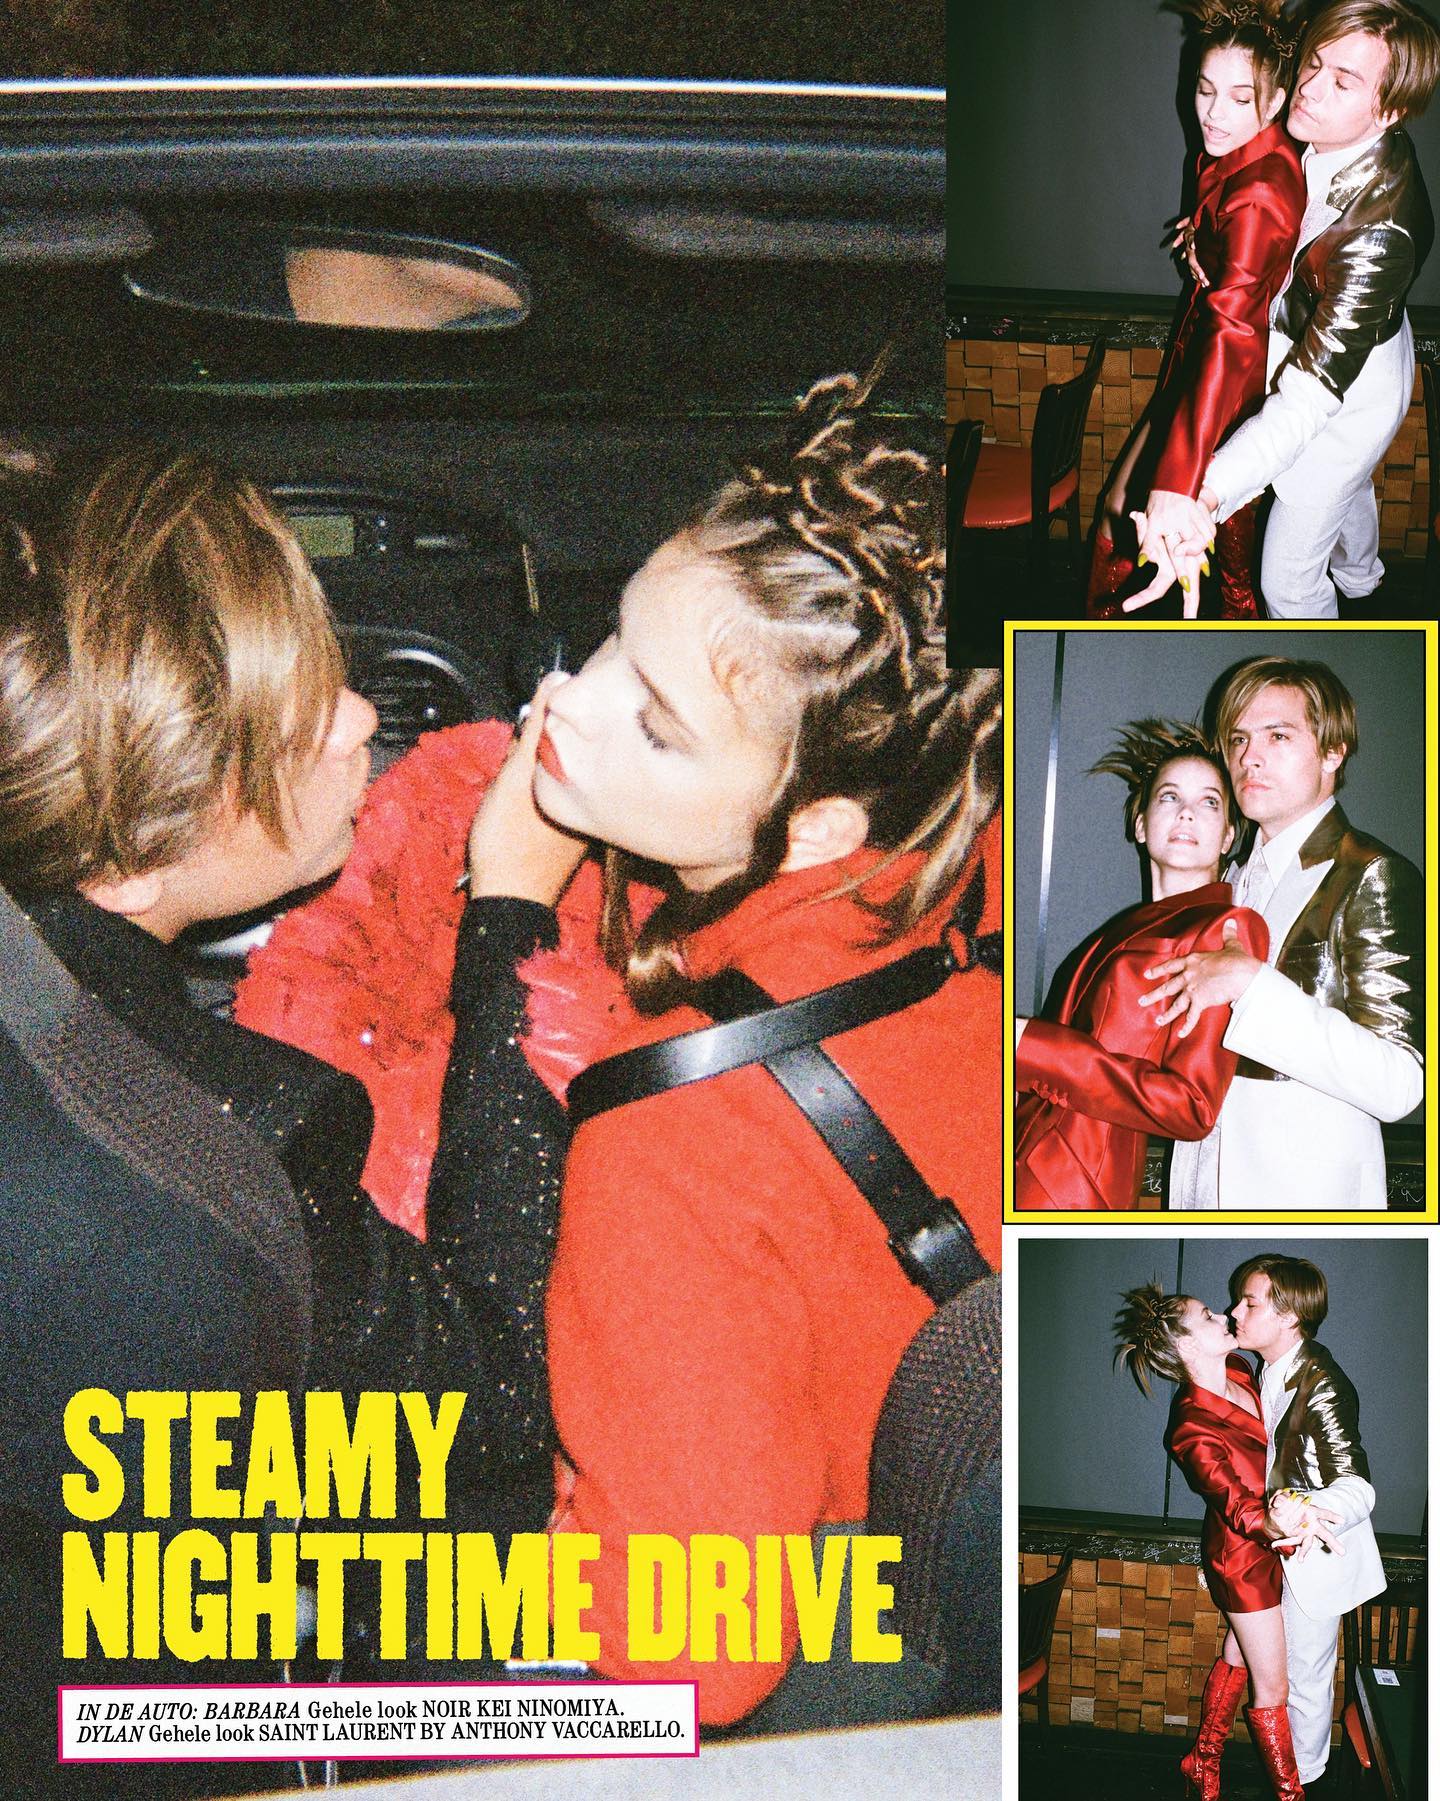 Barbara Palvin et Dylan Sprouse hit the Cover! - Photo 4